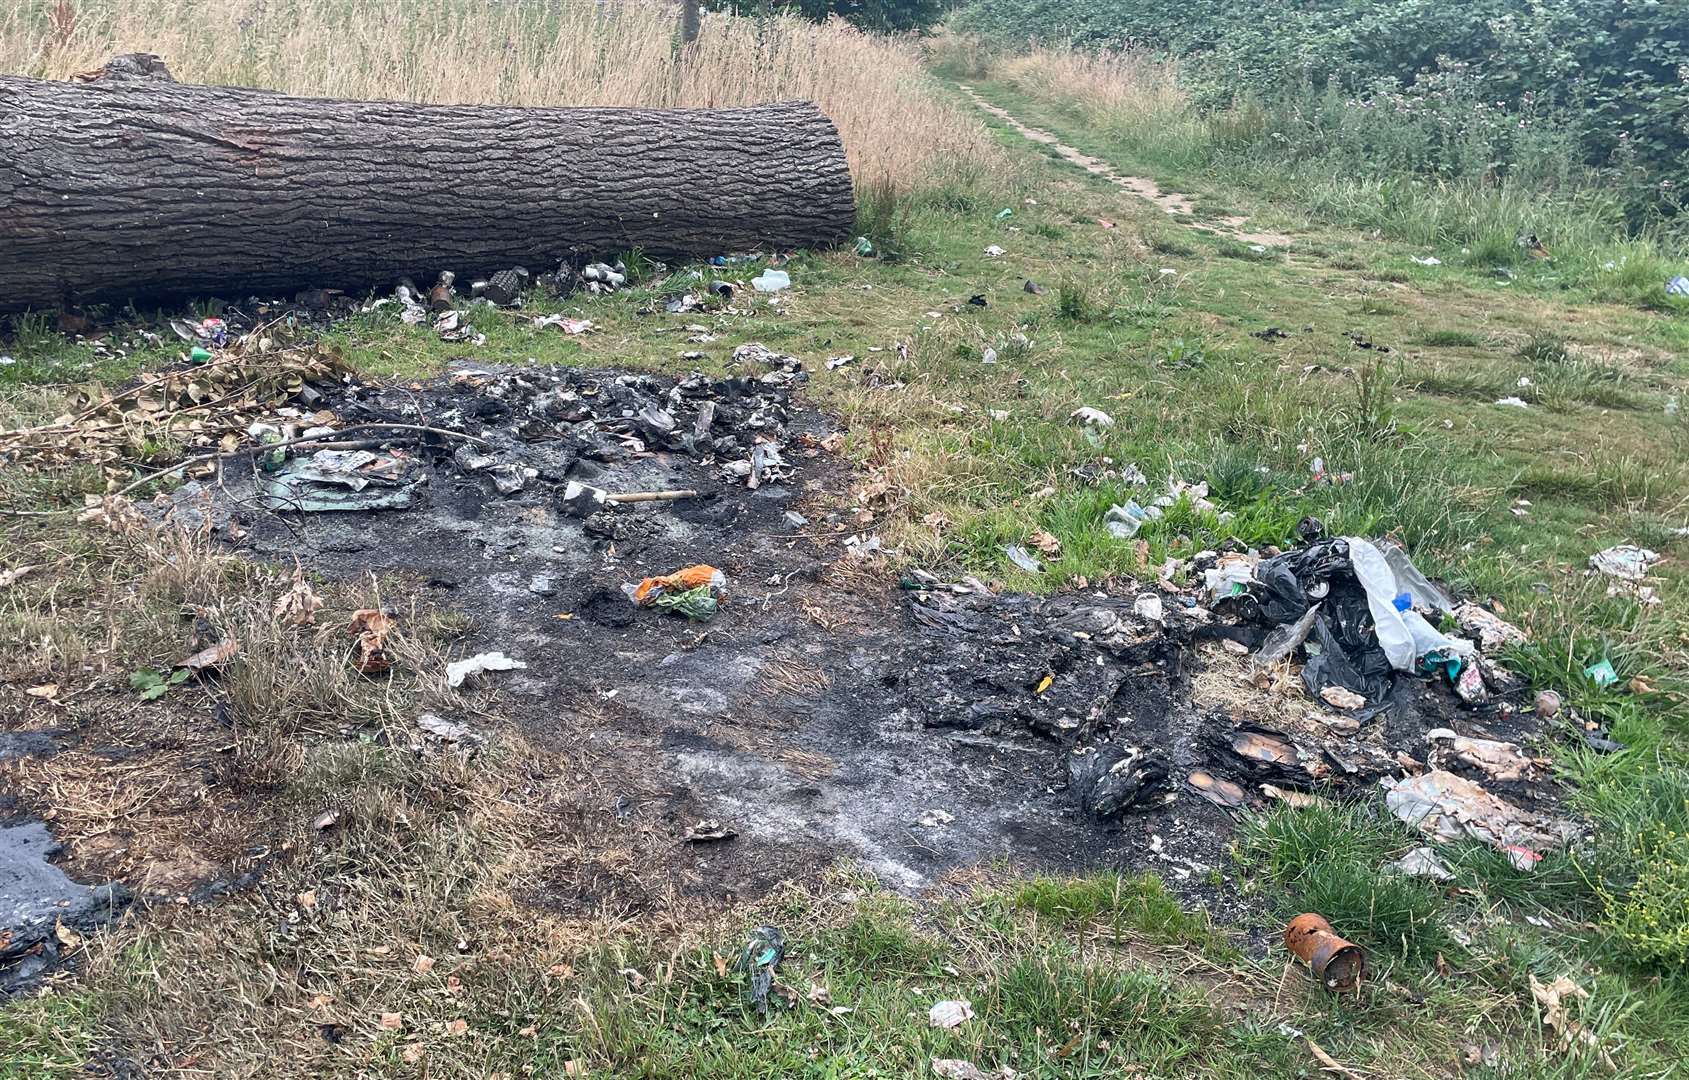 Burnt rubbish was left on the field after a wheelie bin was burnt out